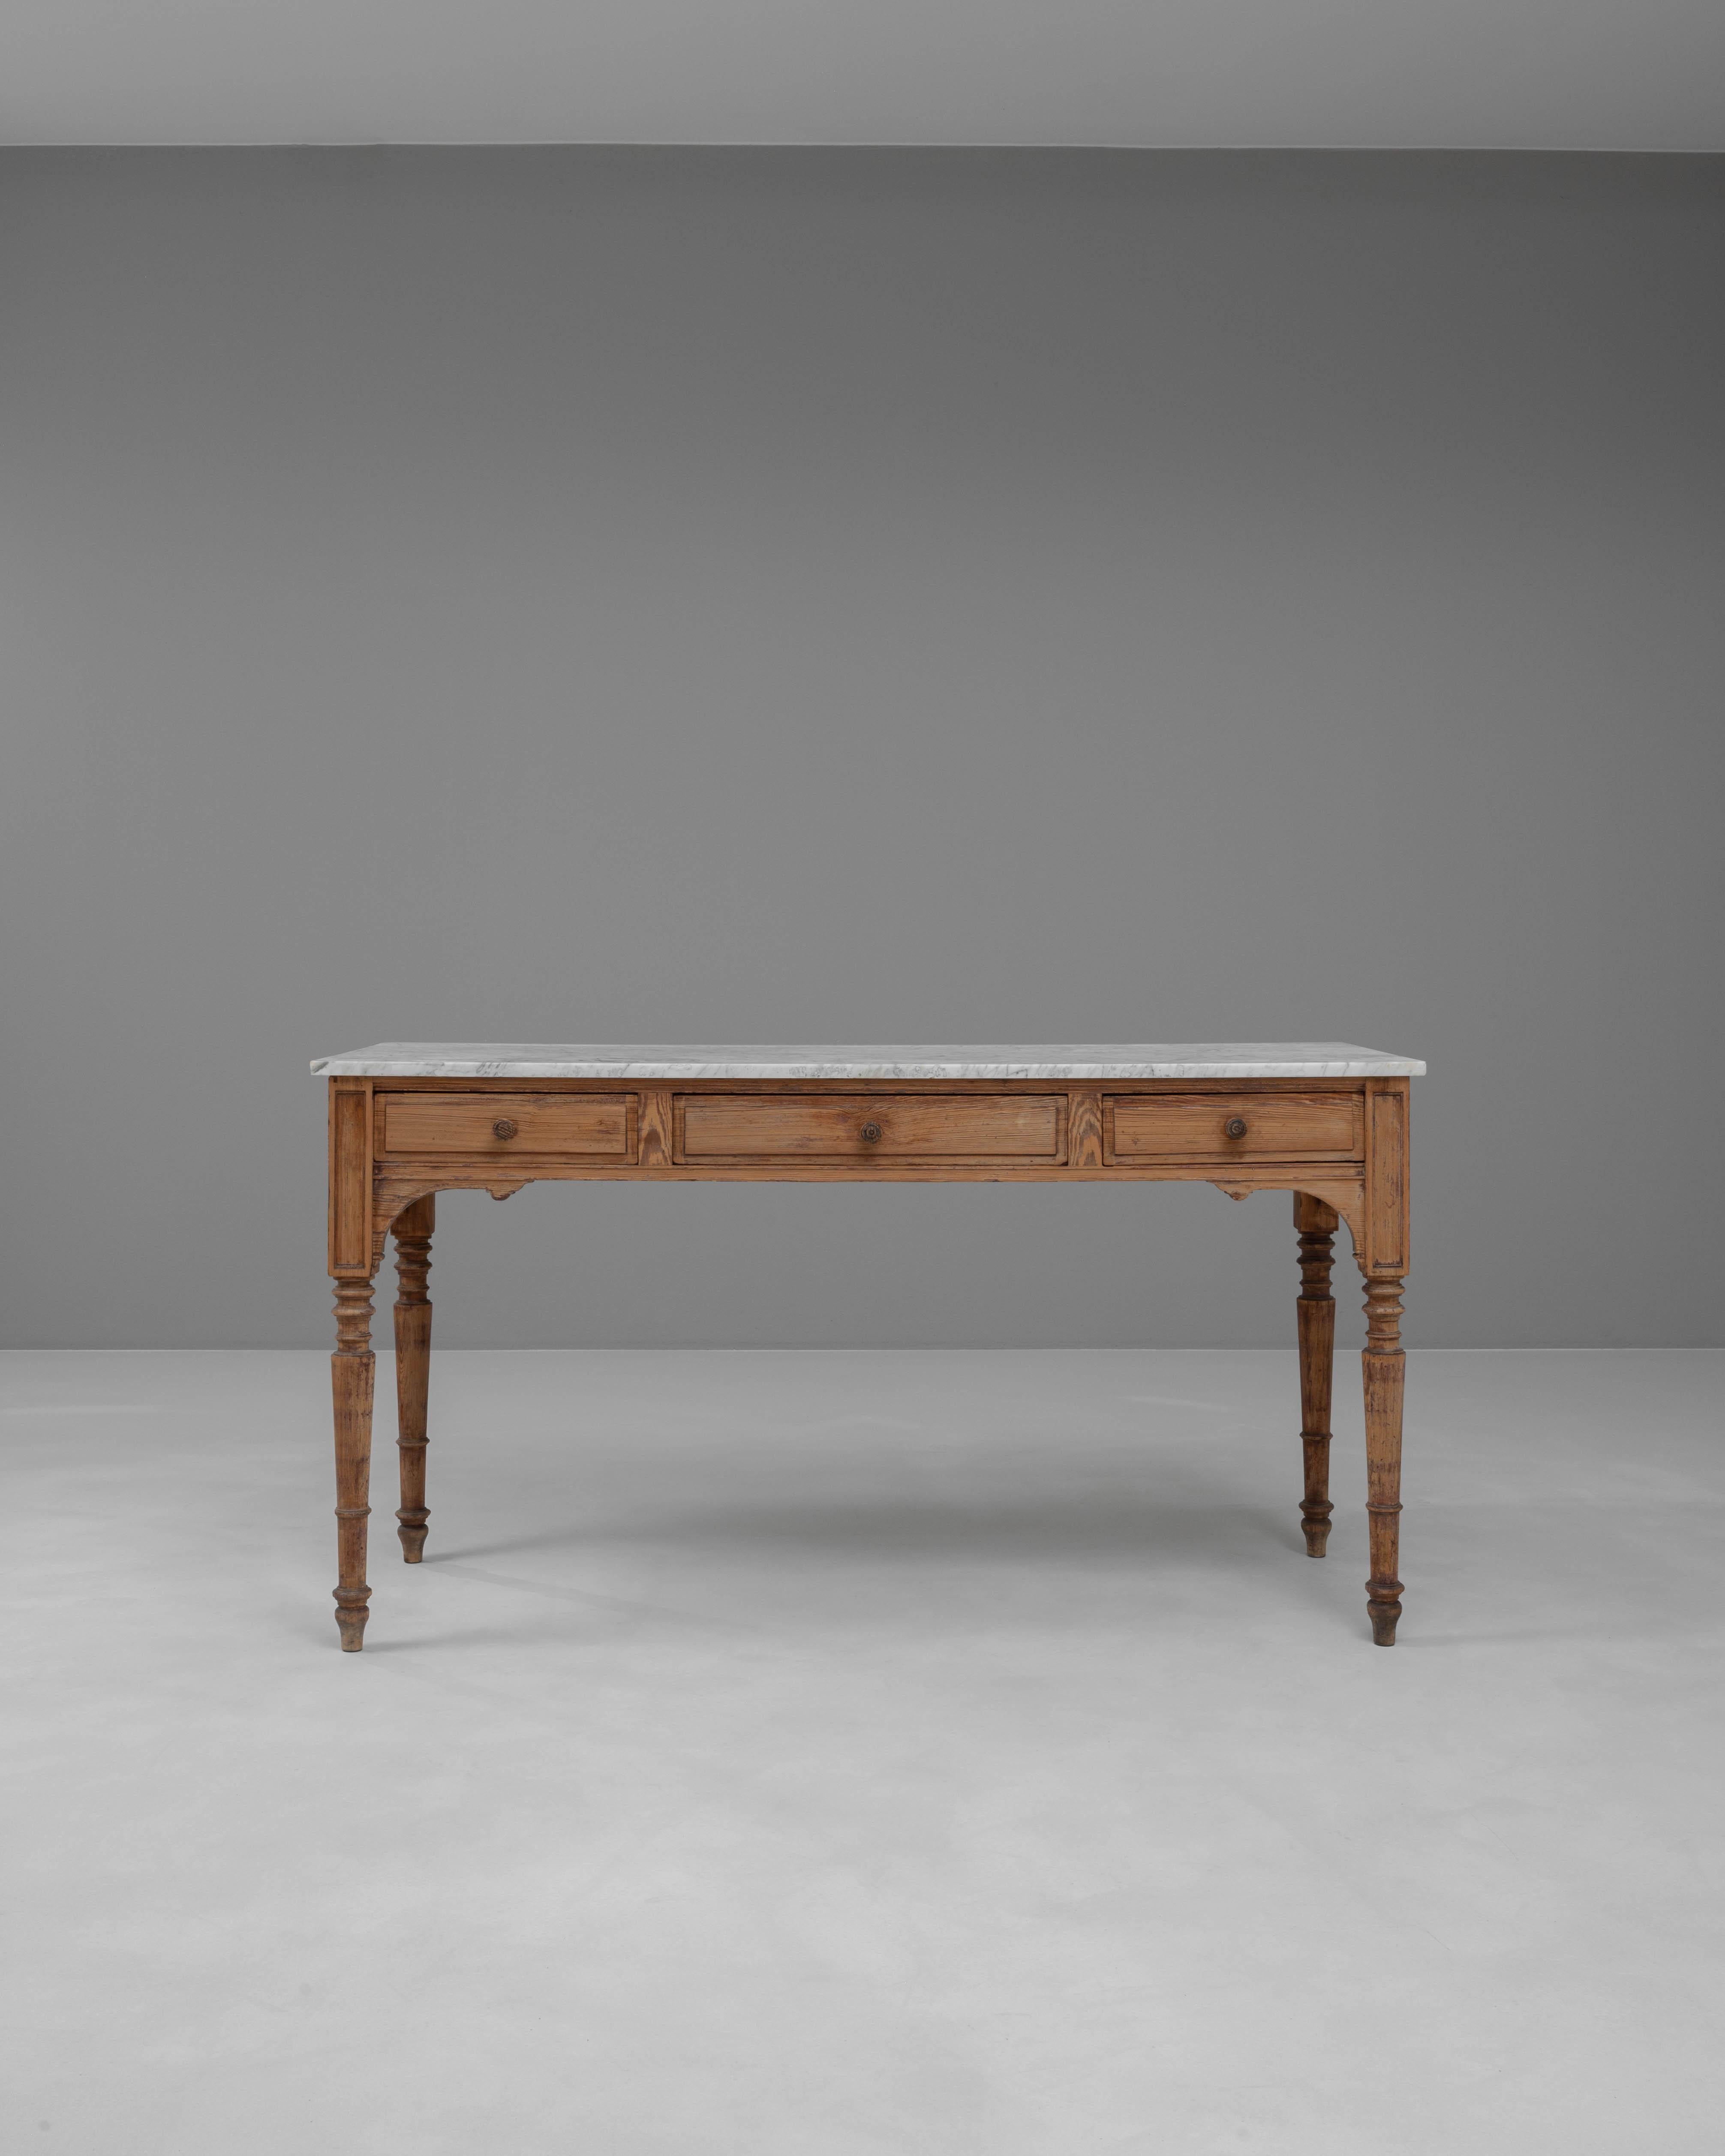 This 19th-century French wooden console table exudes classic elegance with its beautifully crafted design and practical features. The sturdy, carved wooden frame is complemented by a pristine marble top, providing a durable and luxurious surface